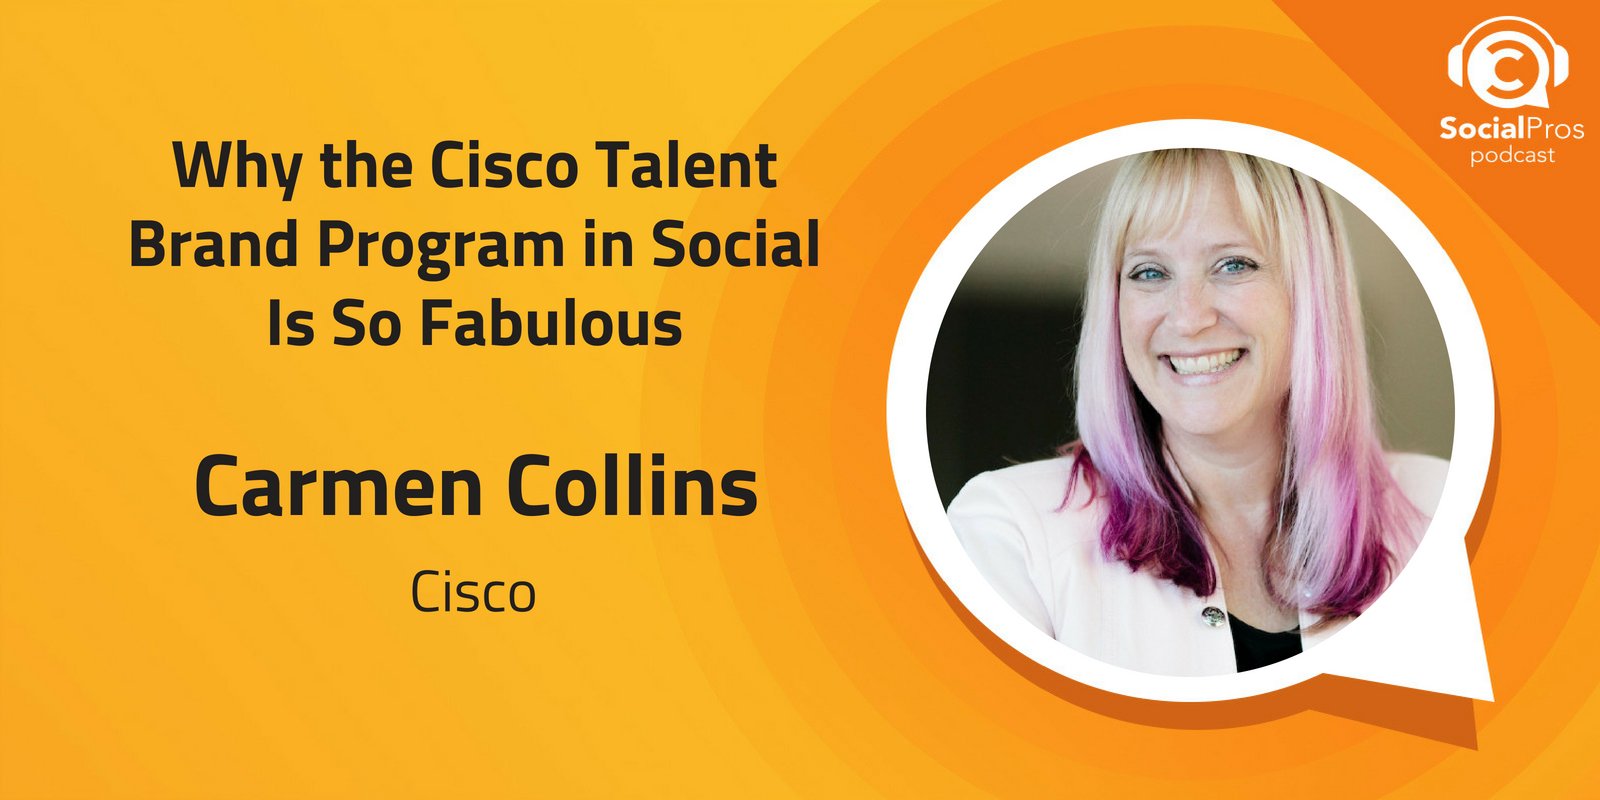 Why the Cisco Talent Brand Program in Social Is So Fabulous